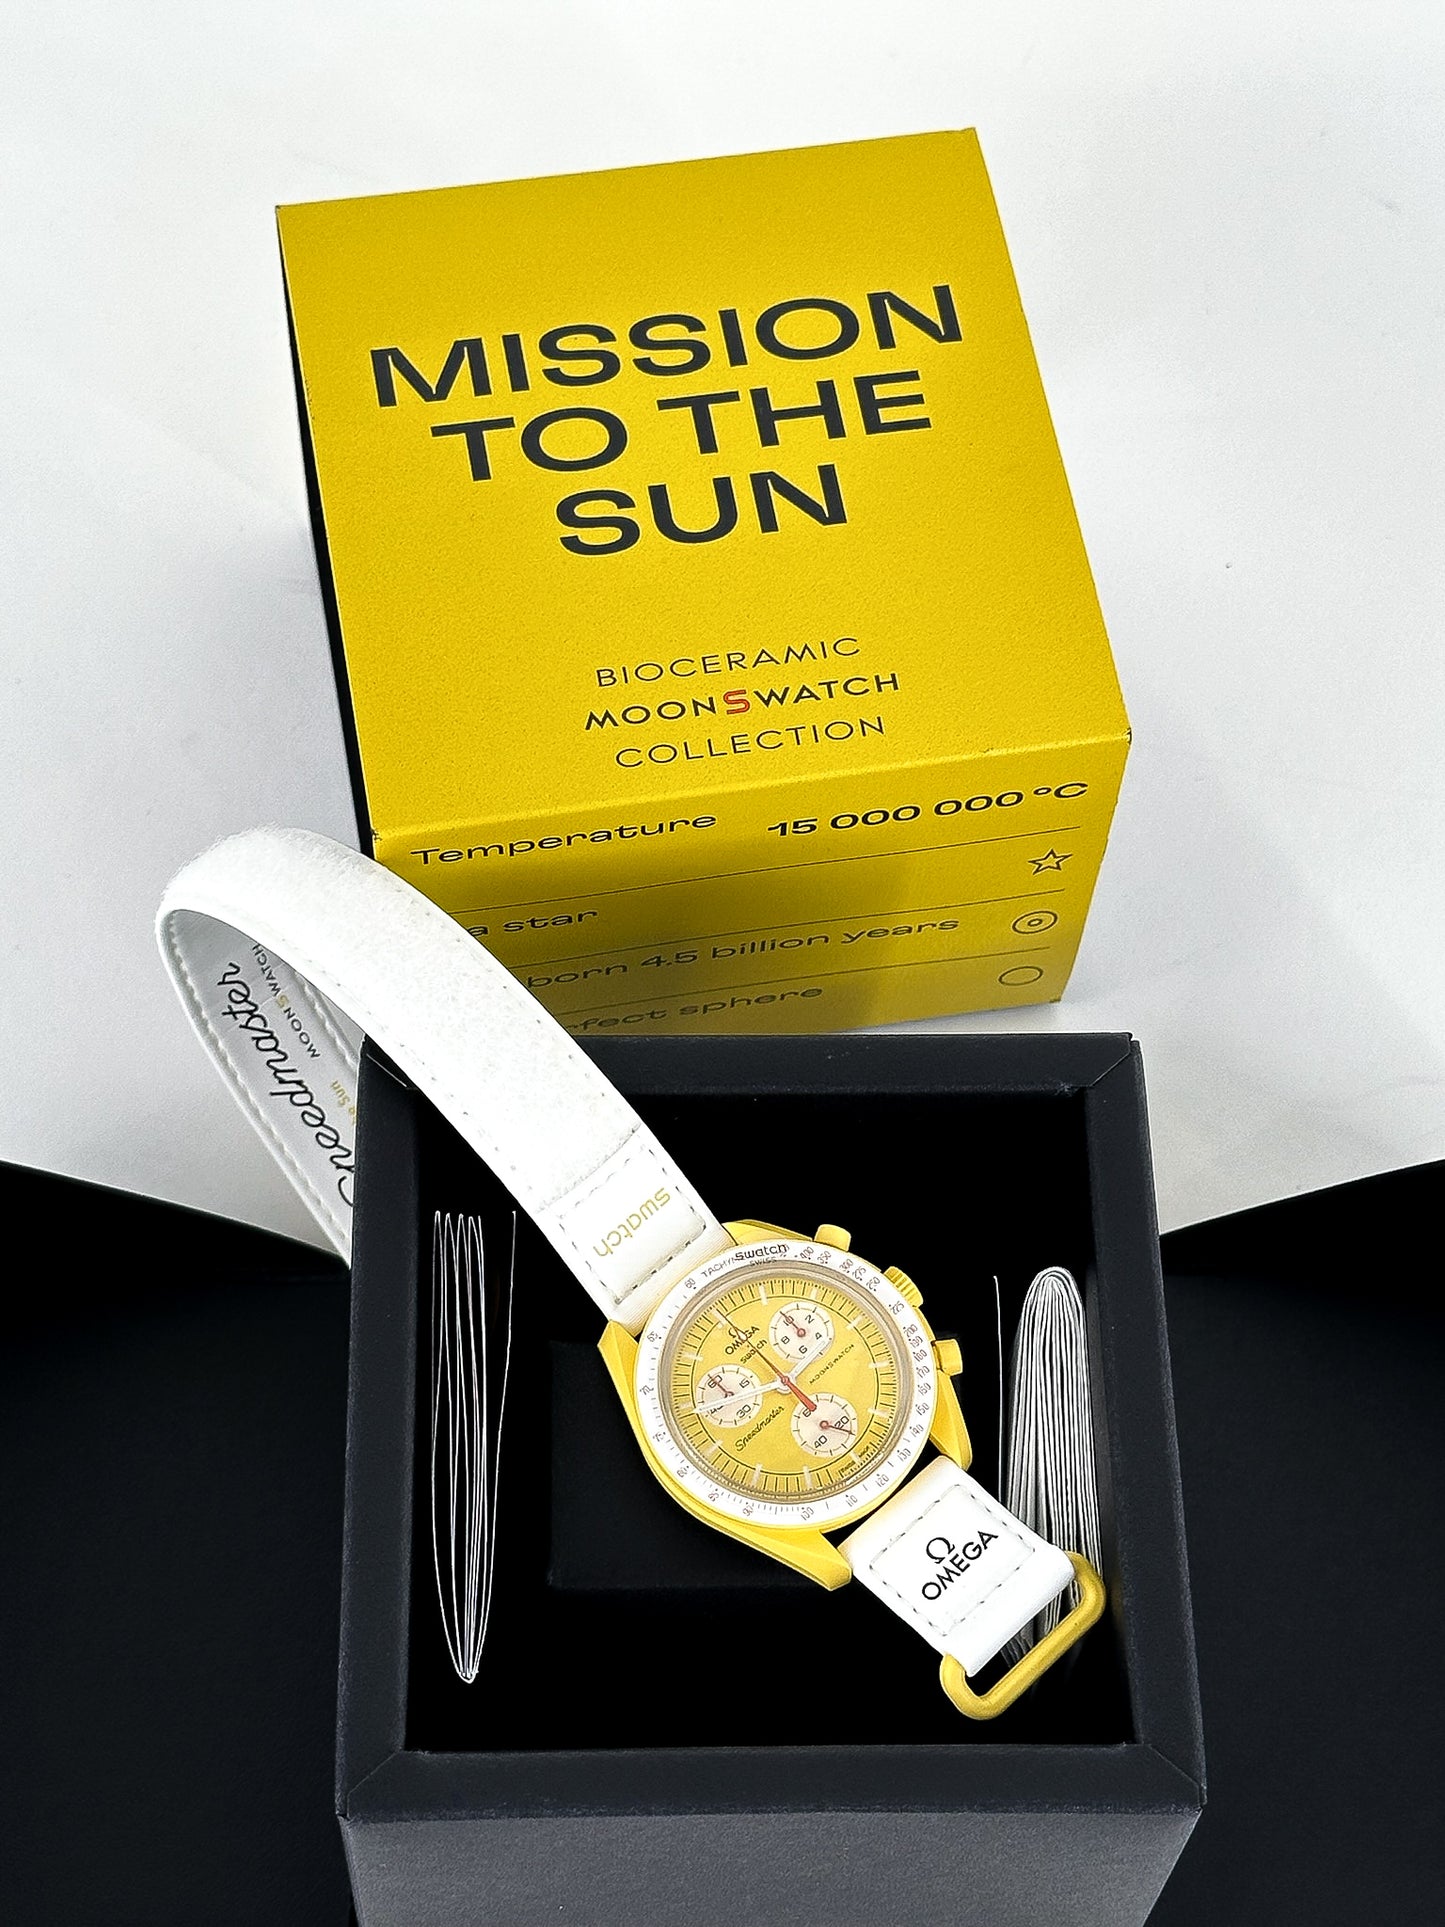 Swatch x Omega Moonswatch Mission
To The Sun